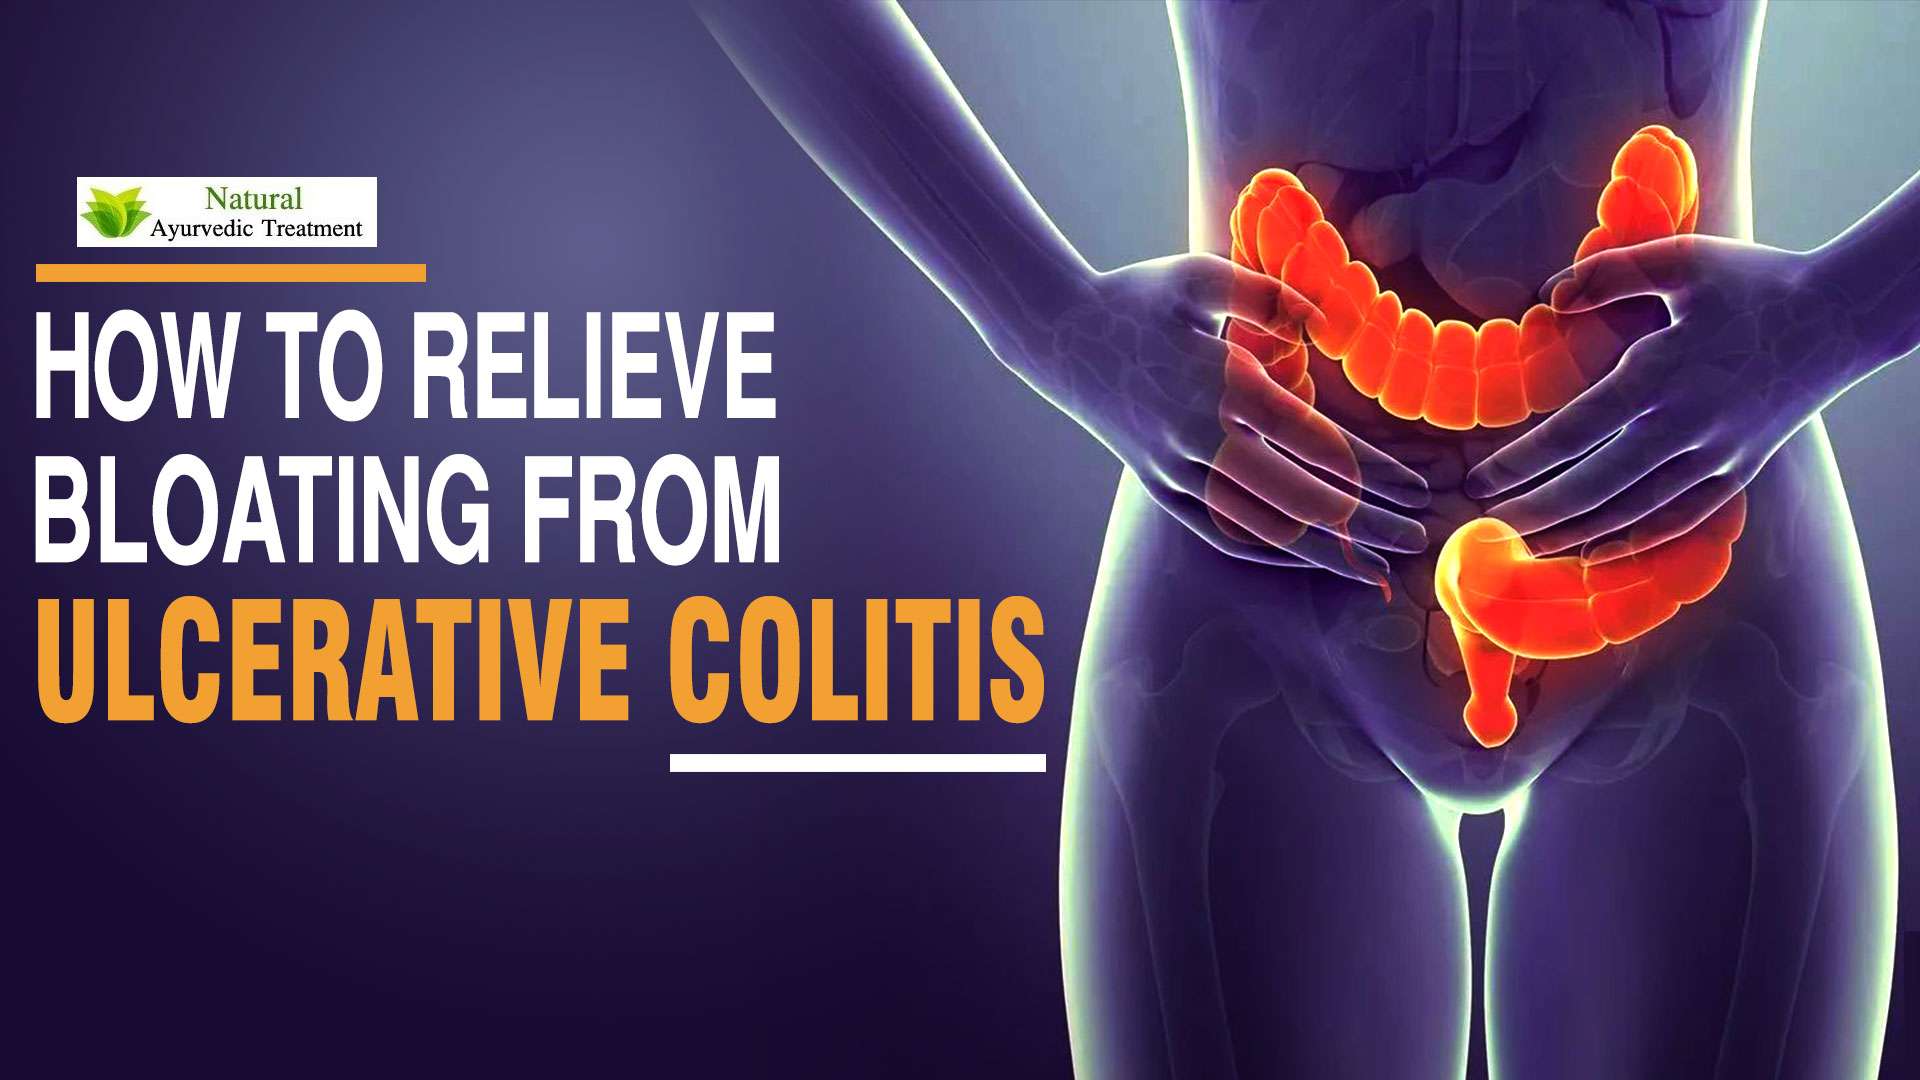 How to Relieve Bloating from Ulcerative Colitis?